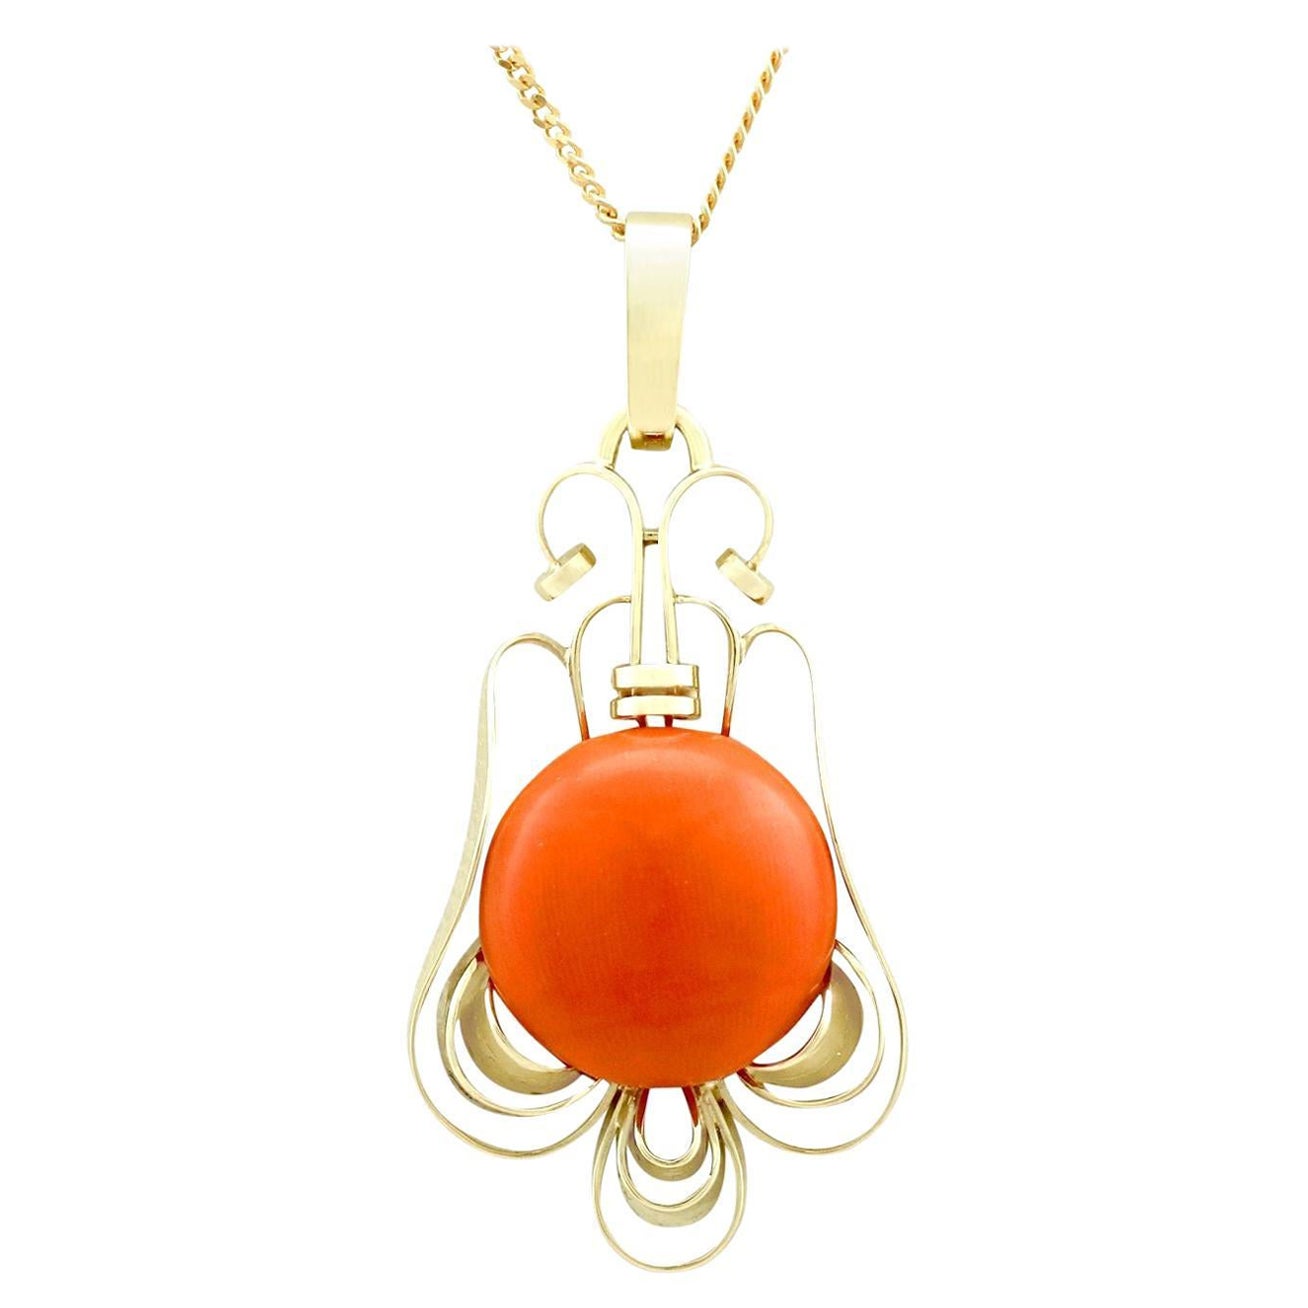 Vintage 7.47carat Coral and Yellow Gold Pendant